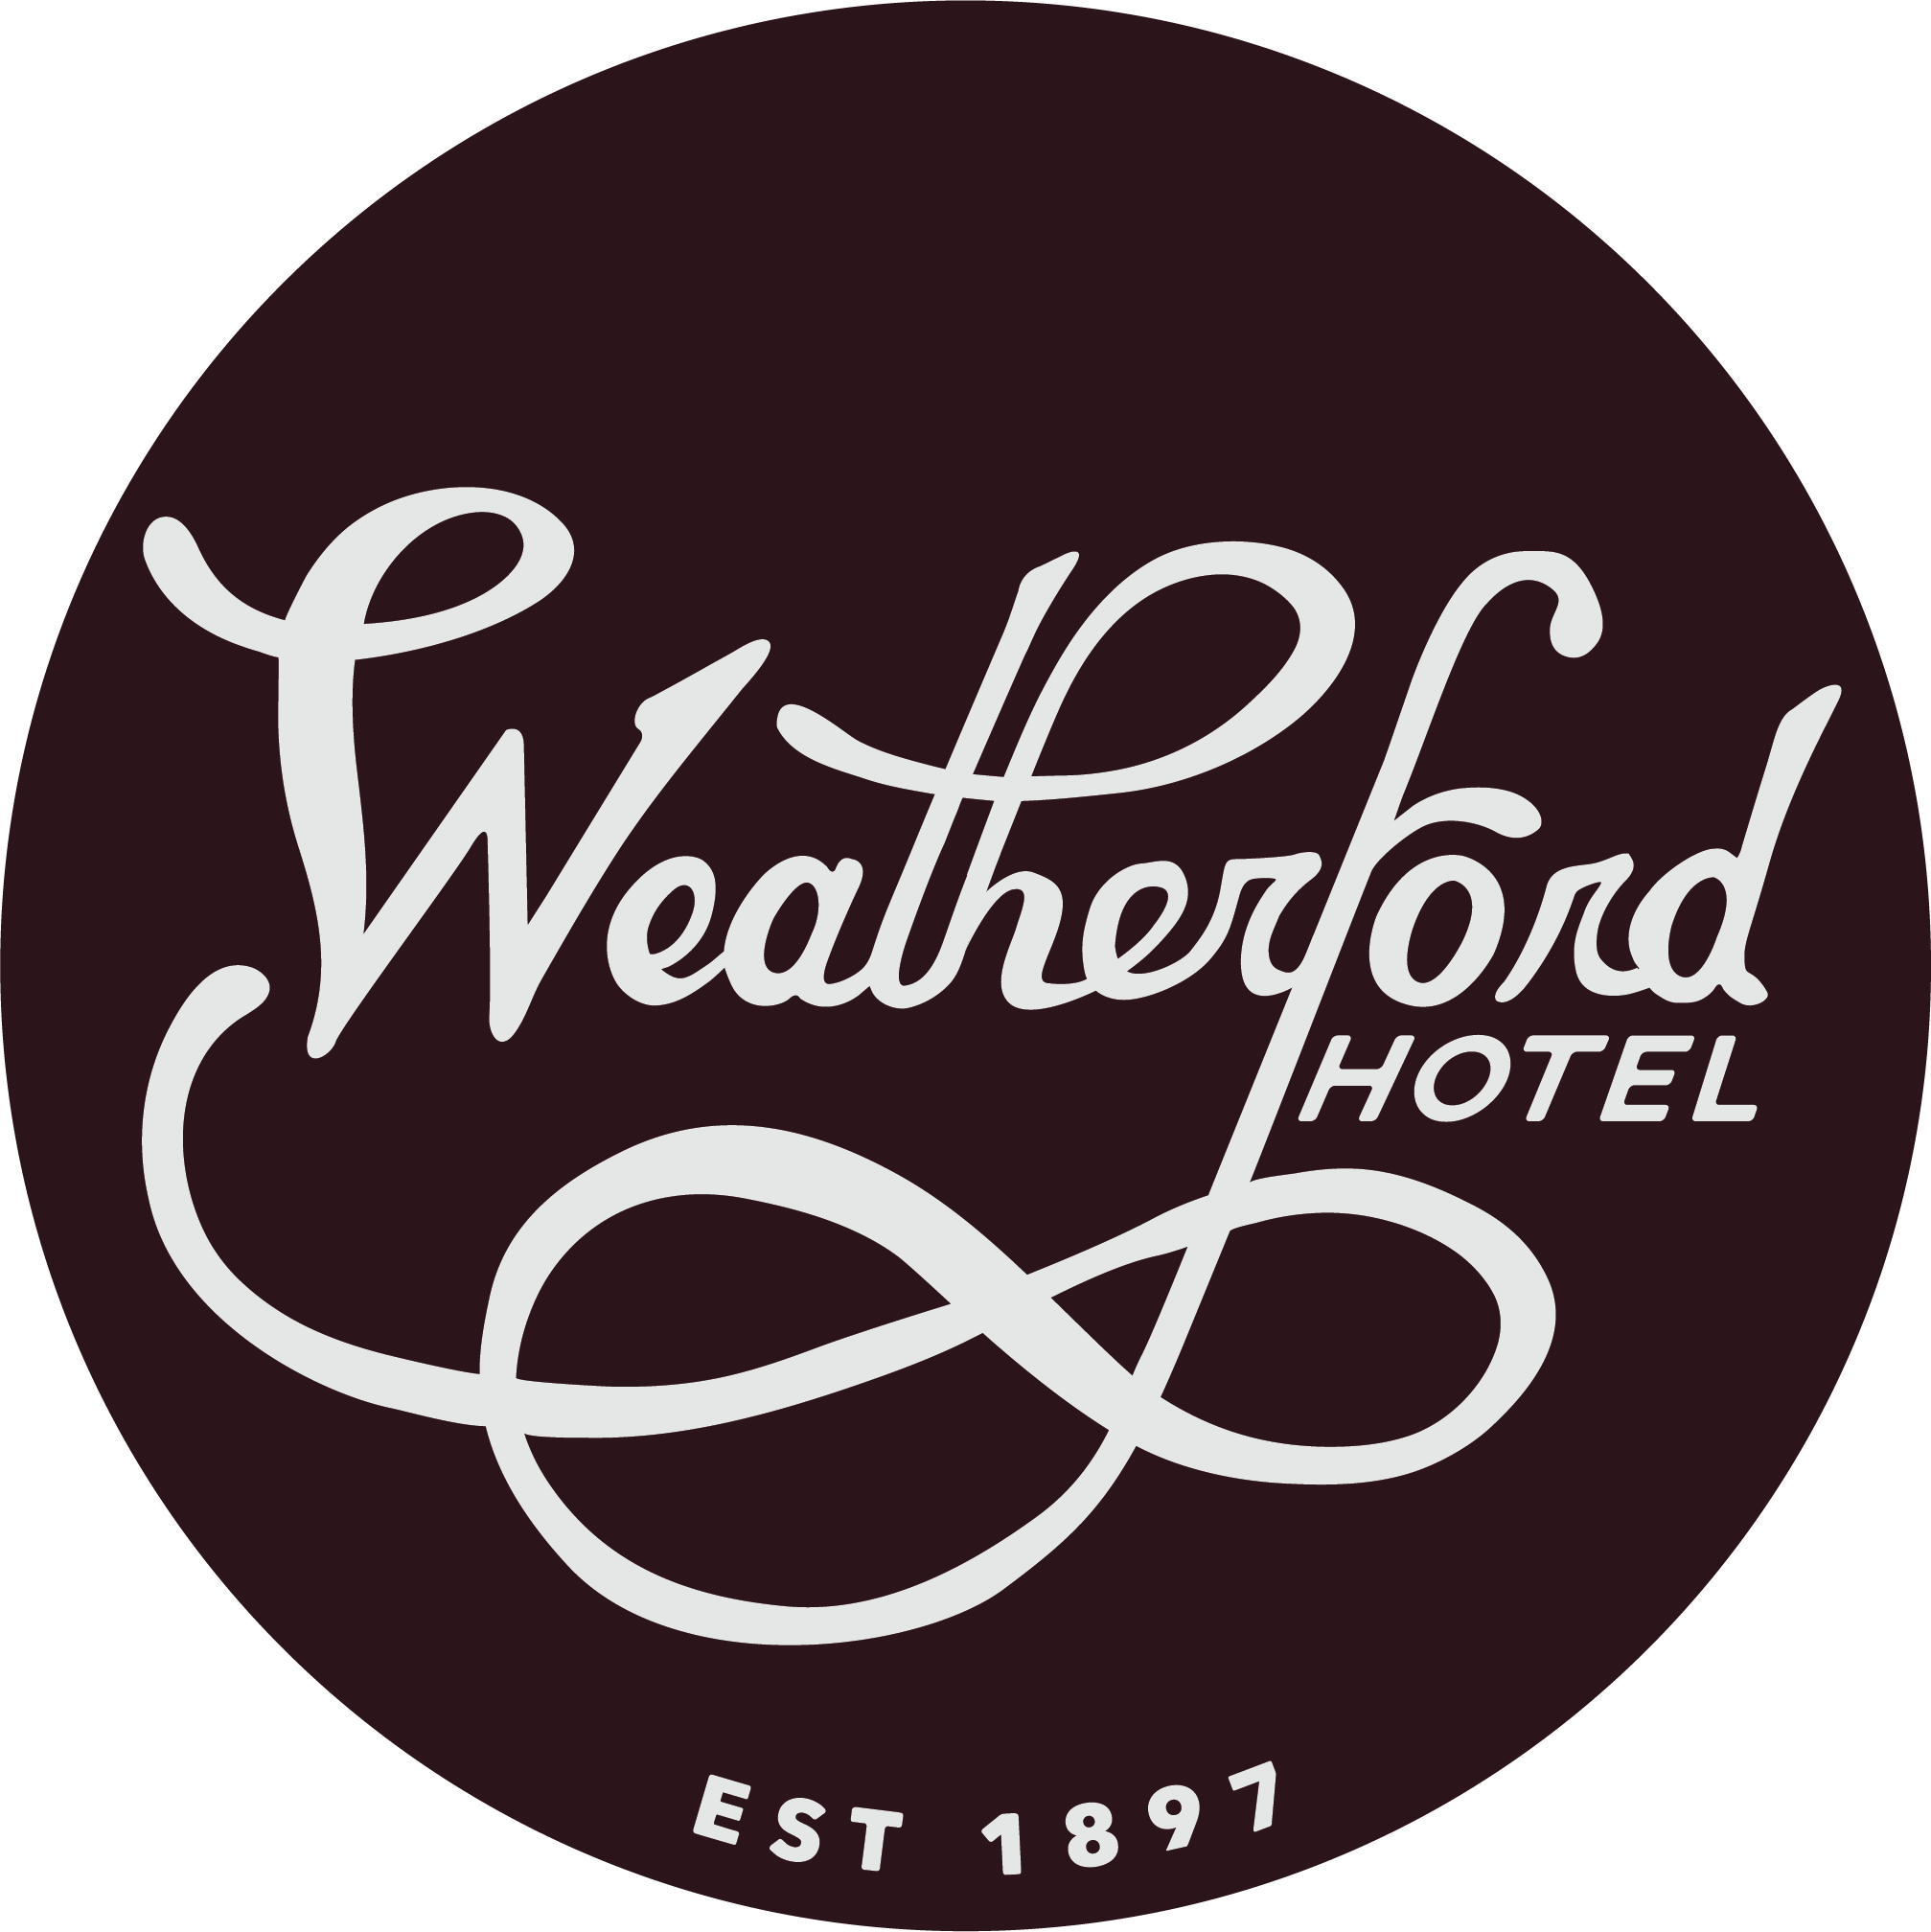 Weatherford Logo - The Weatherford Hotel. Historic Hotels in Flagstaff